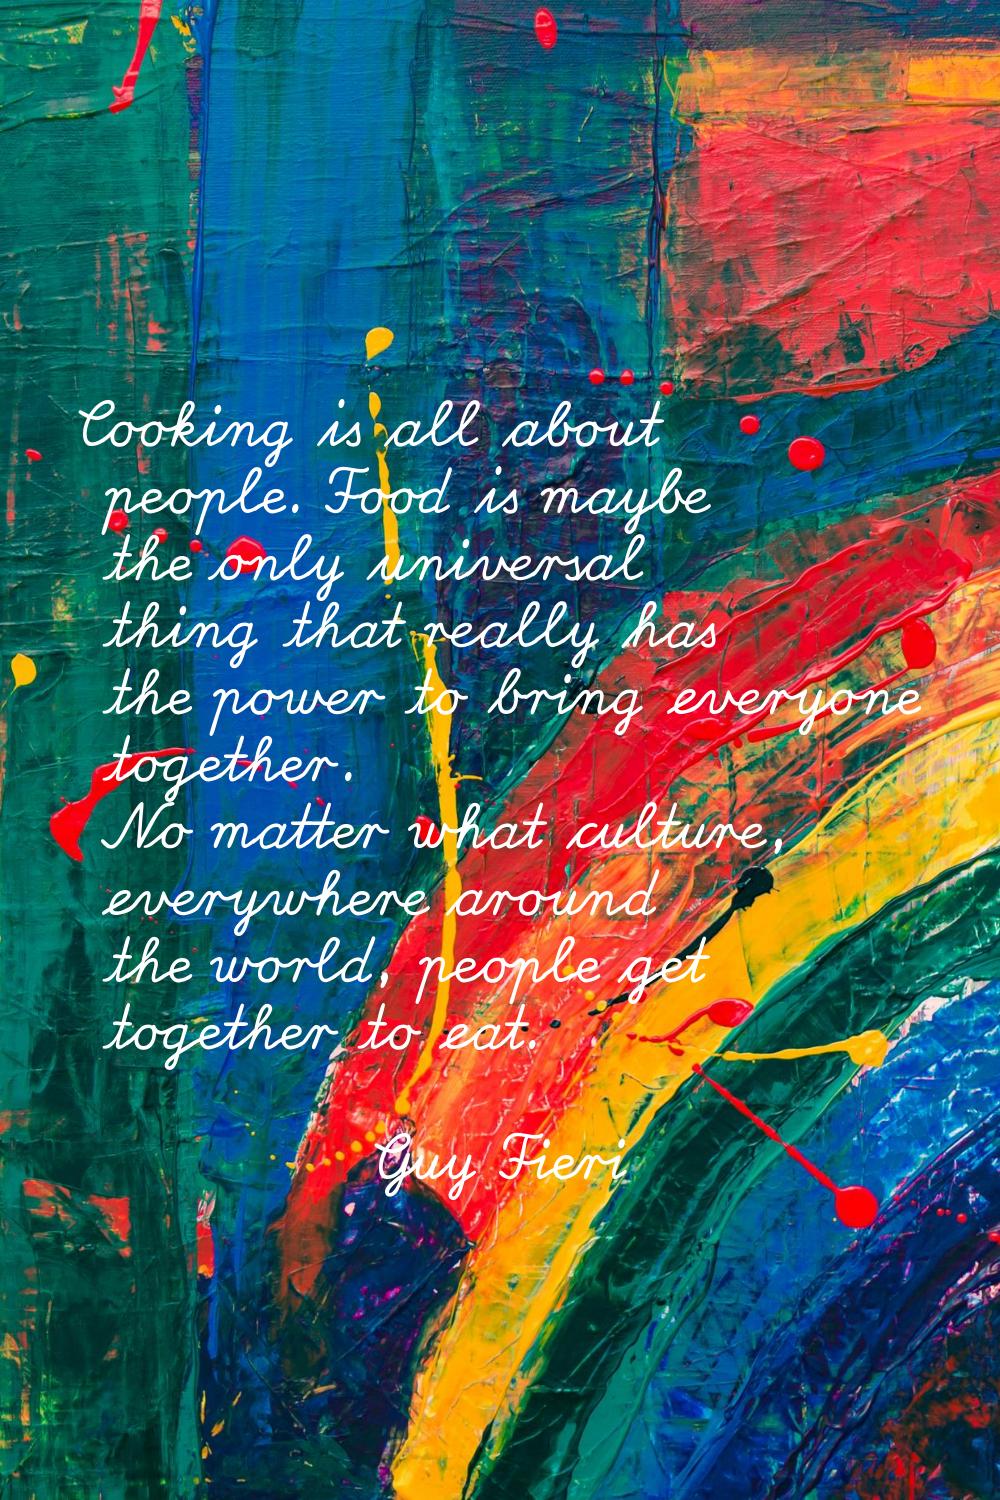 Cooking is all about people. Food is maybe the only universal thing that really has the power to br